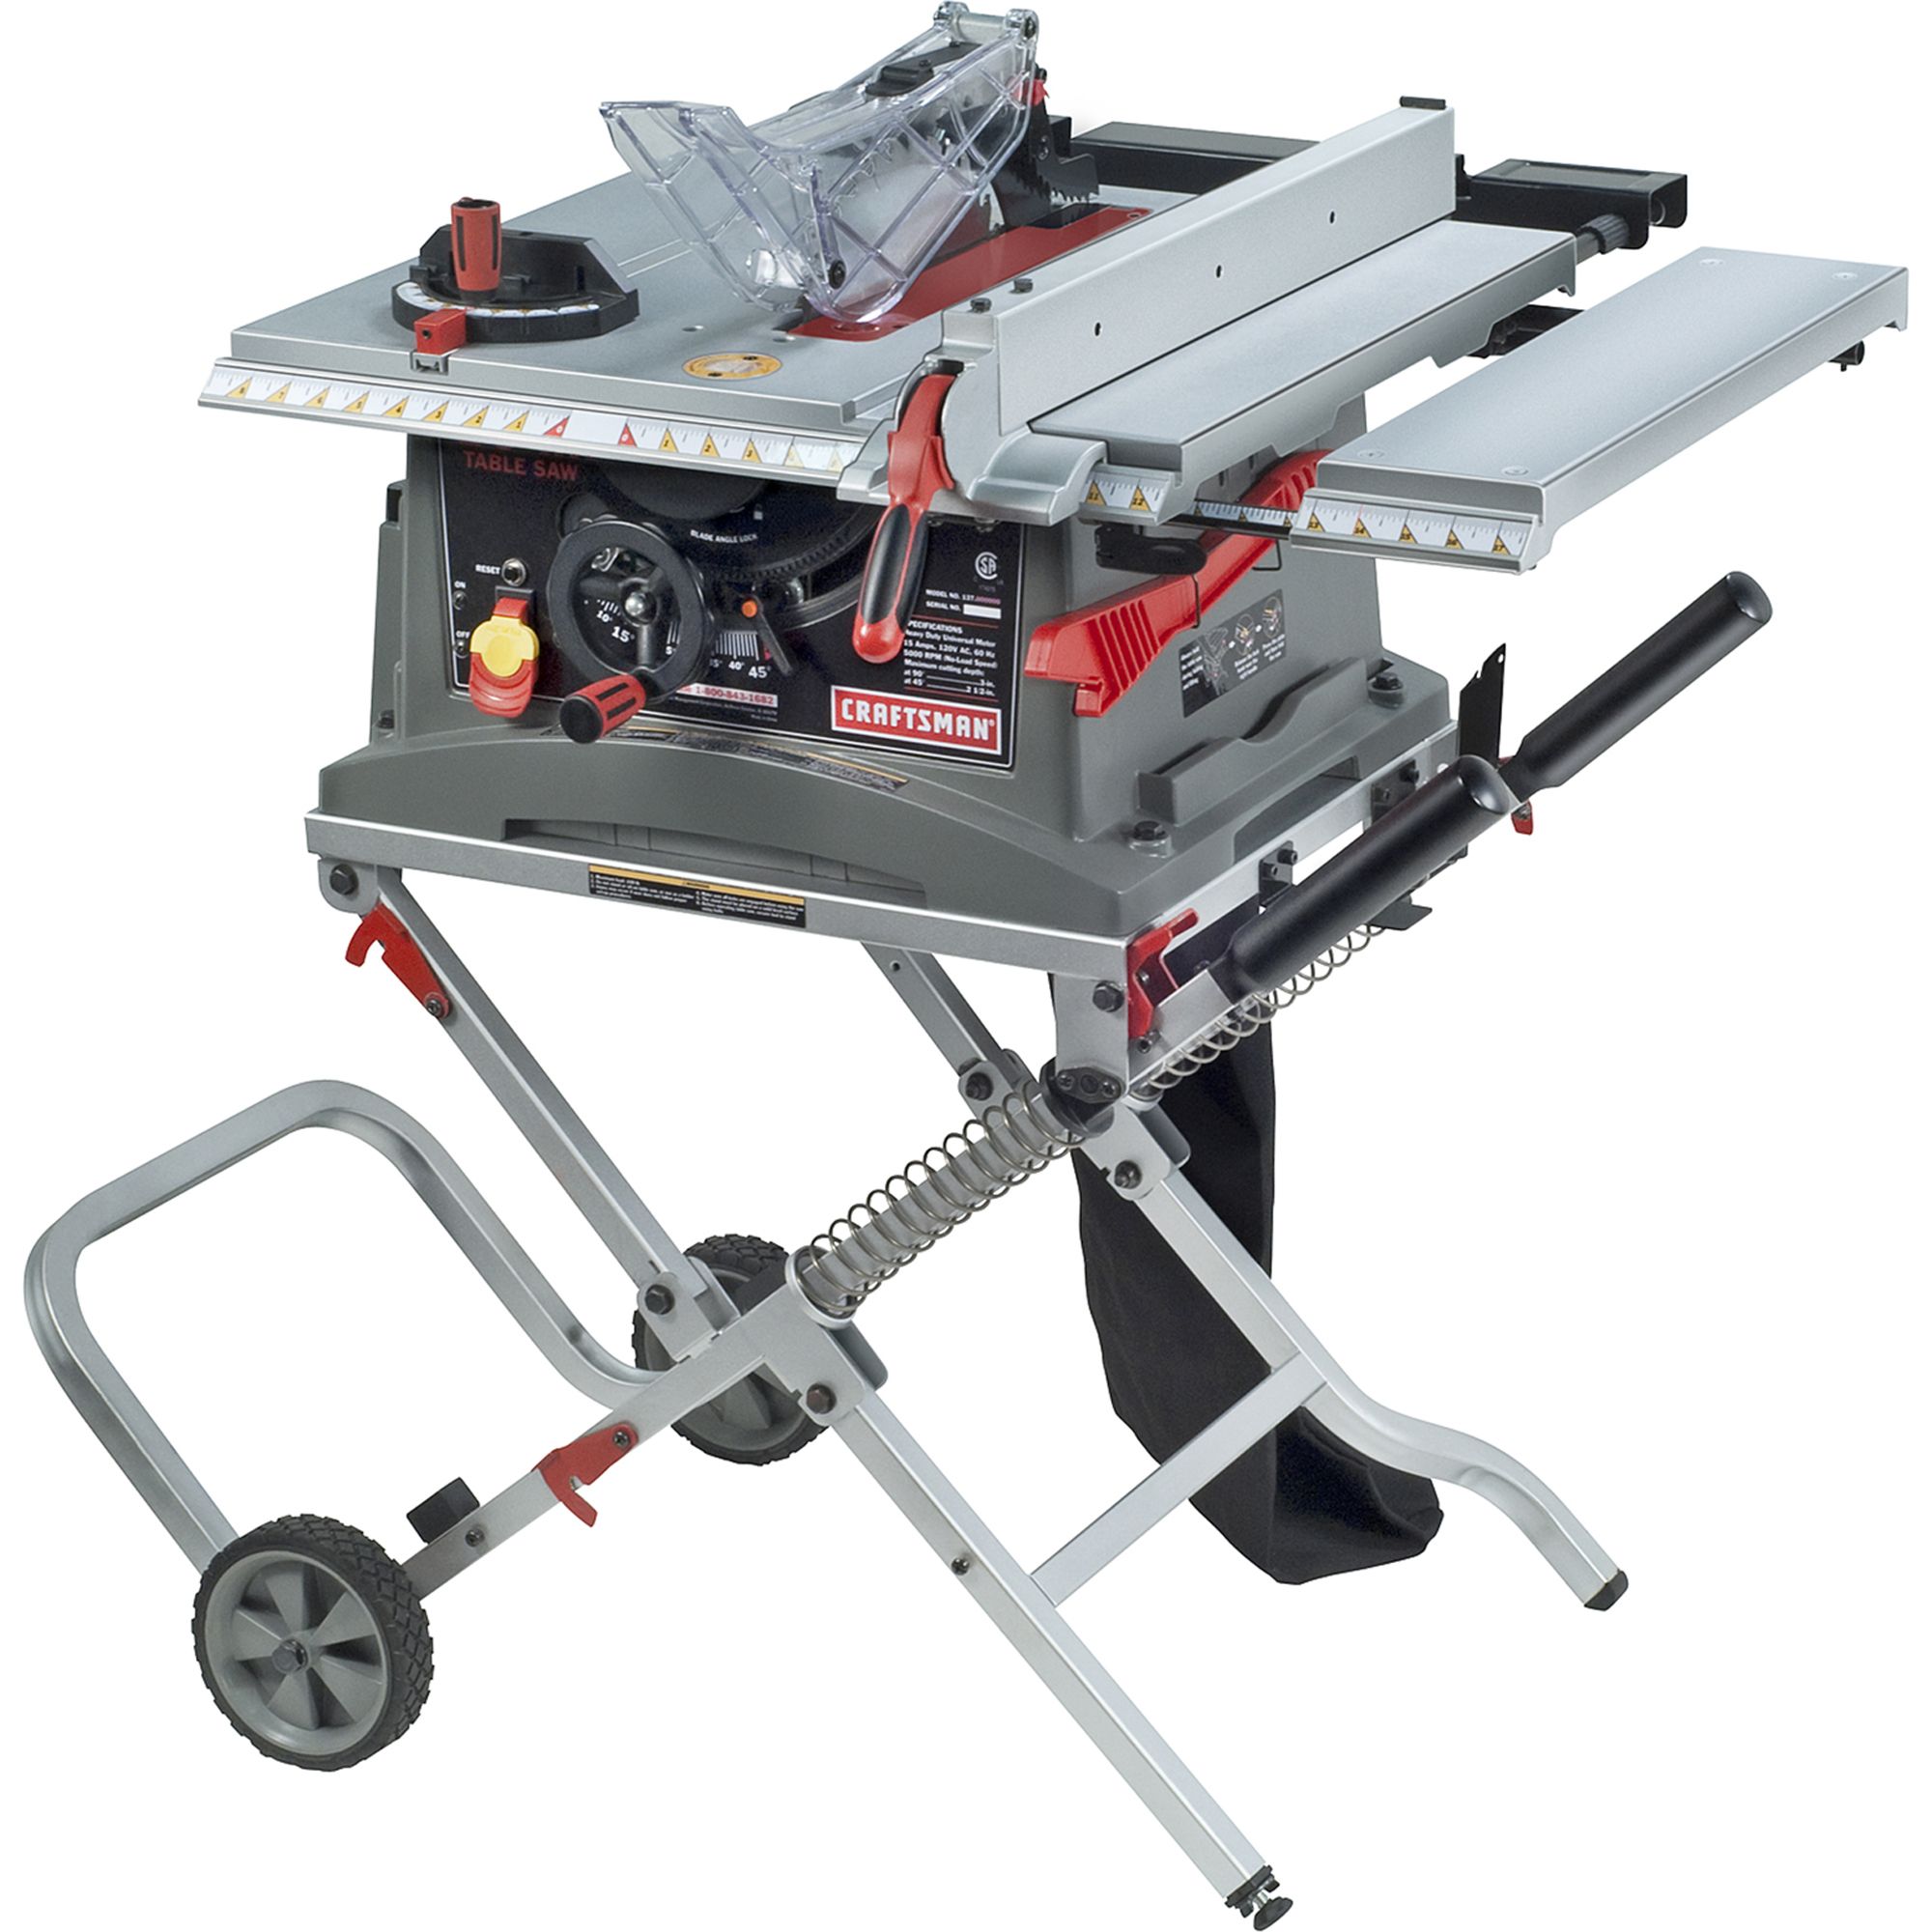 Craftsman - JT2502RC - 10" Jobsite Table Saw with Folding Stand (28463 ...